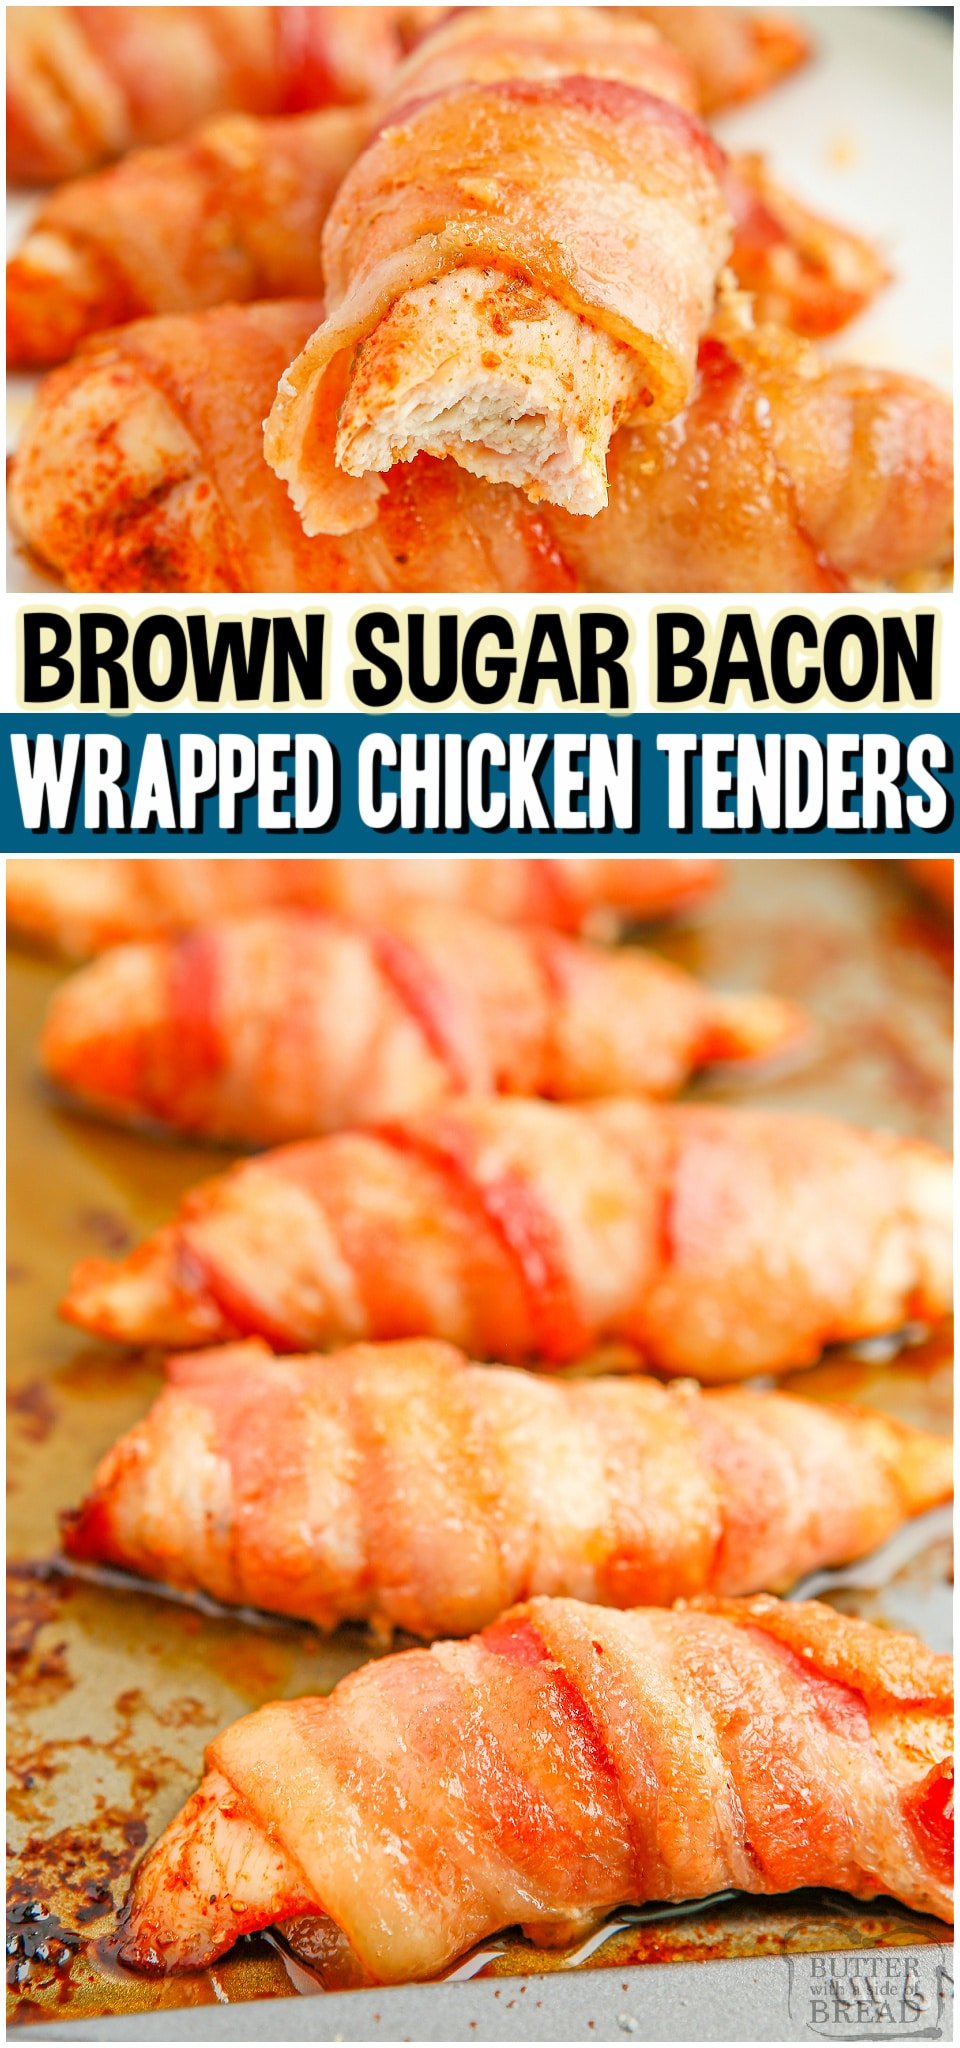 Bacon Wrapped Chicken Tenders made with simple, flavorful ingredients for a tasty appetizer or easy dinner! Easy chicken recipe made with bacon & brown sugar, which is always a winning combination!